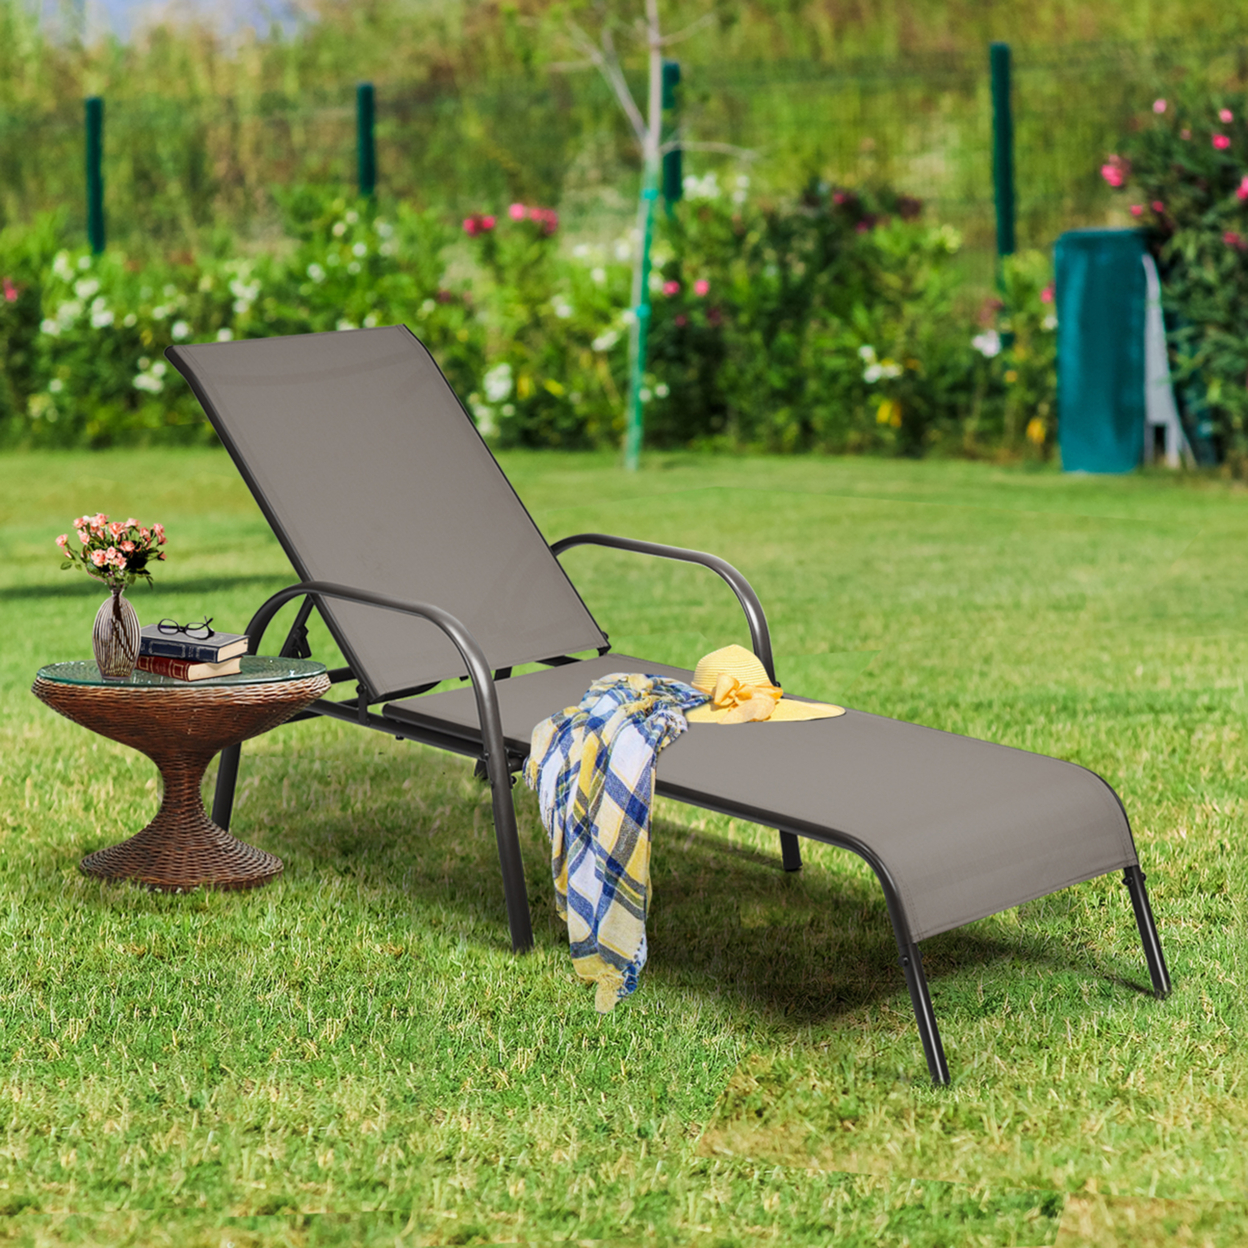 Adjustable Chaise Lounge Chair Recliner Patio Yard Outdoor W/ Armrest Brown